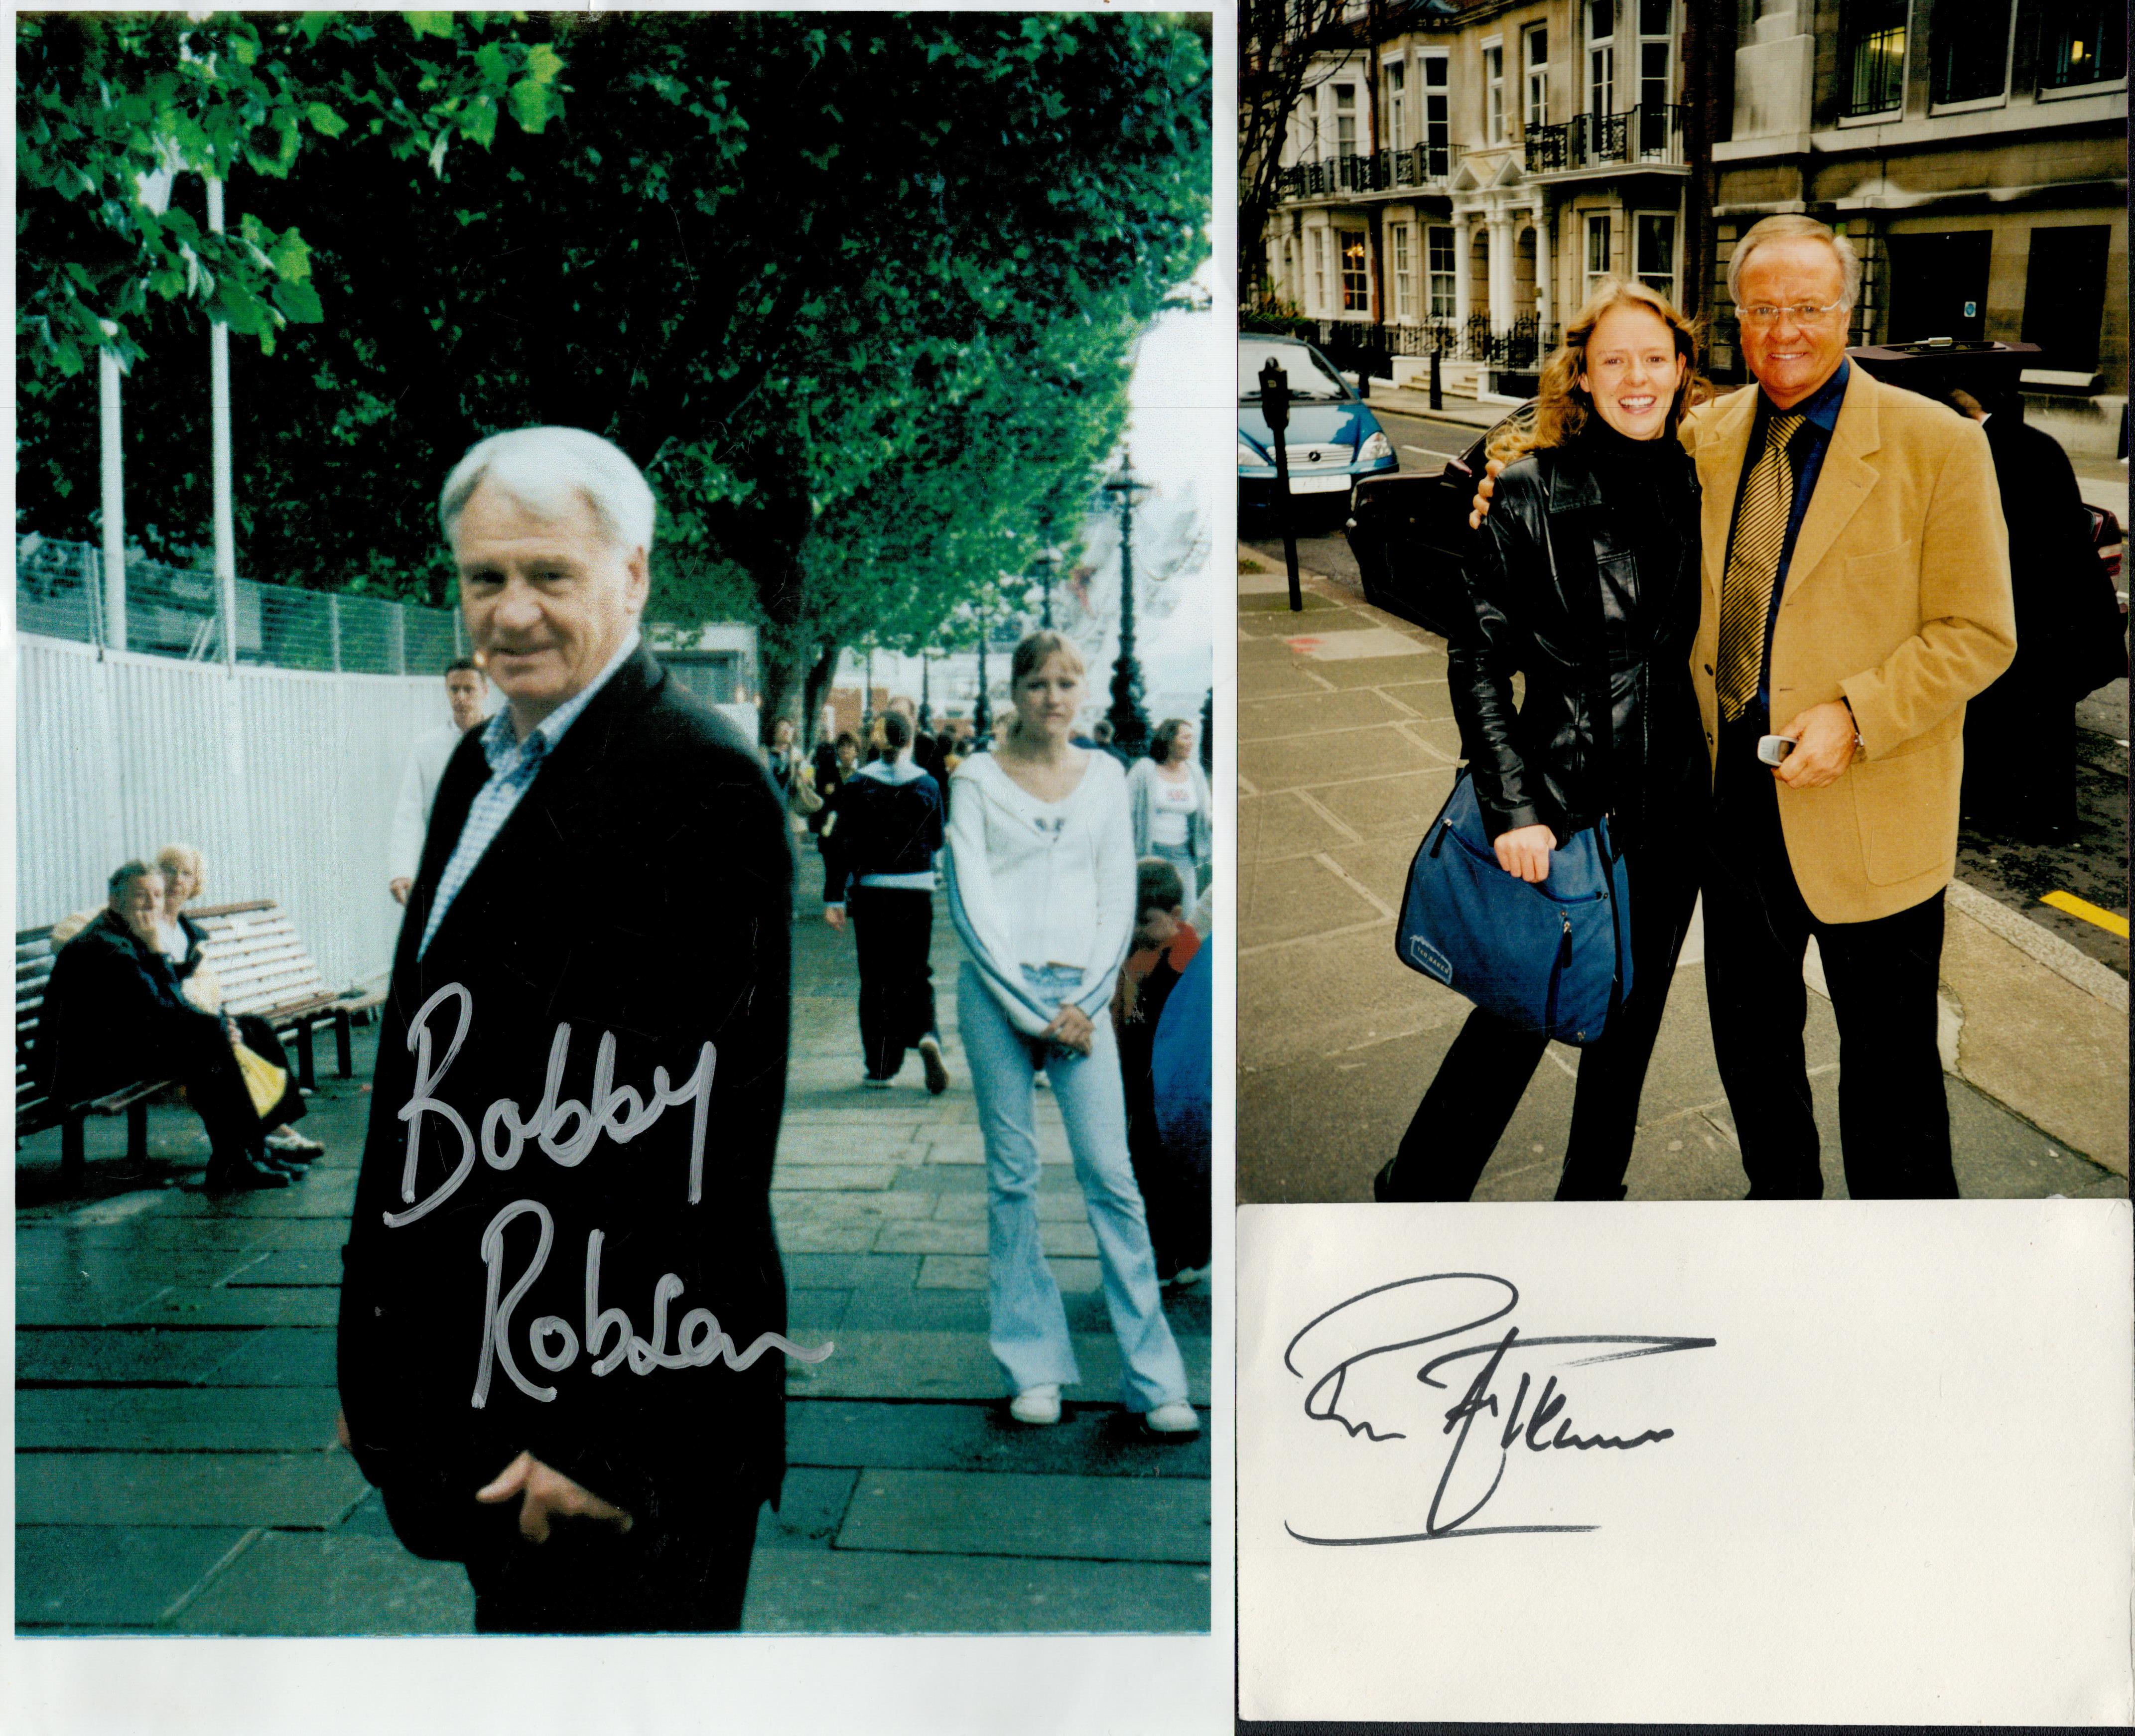 Football manager collection of 3 signed photos and 1 signed white card with names of Bobby Robson,